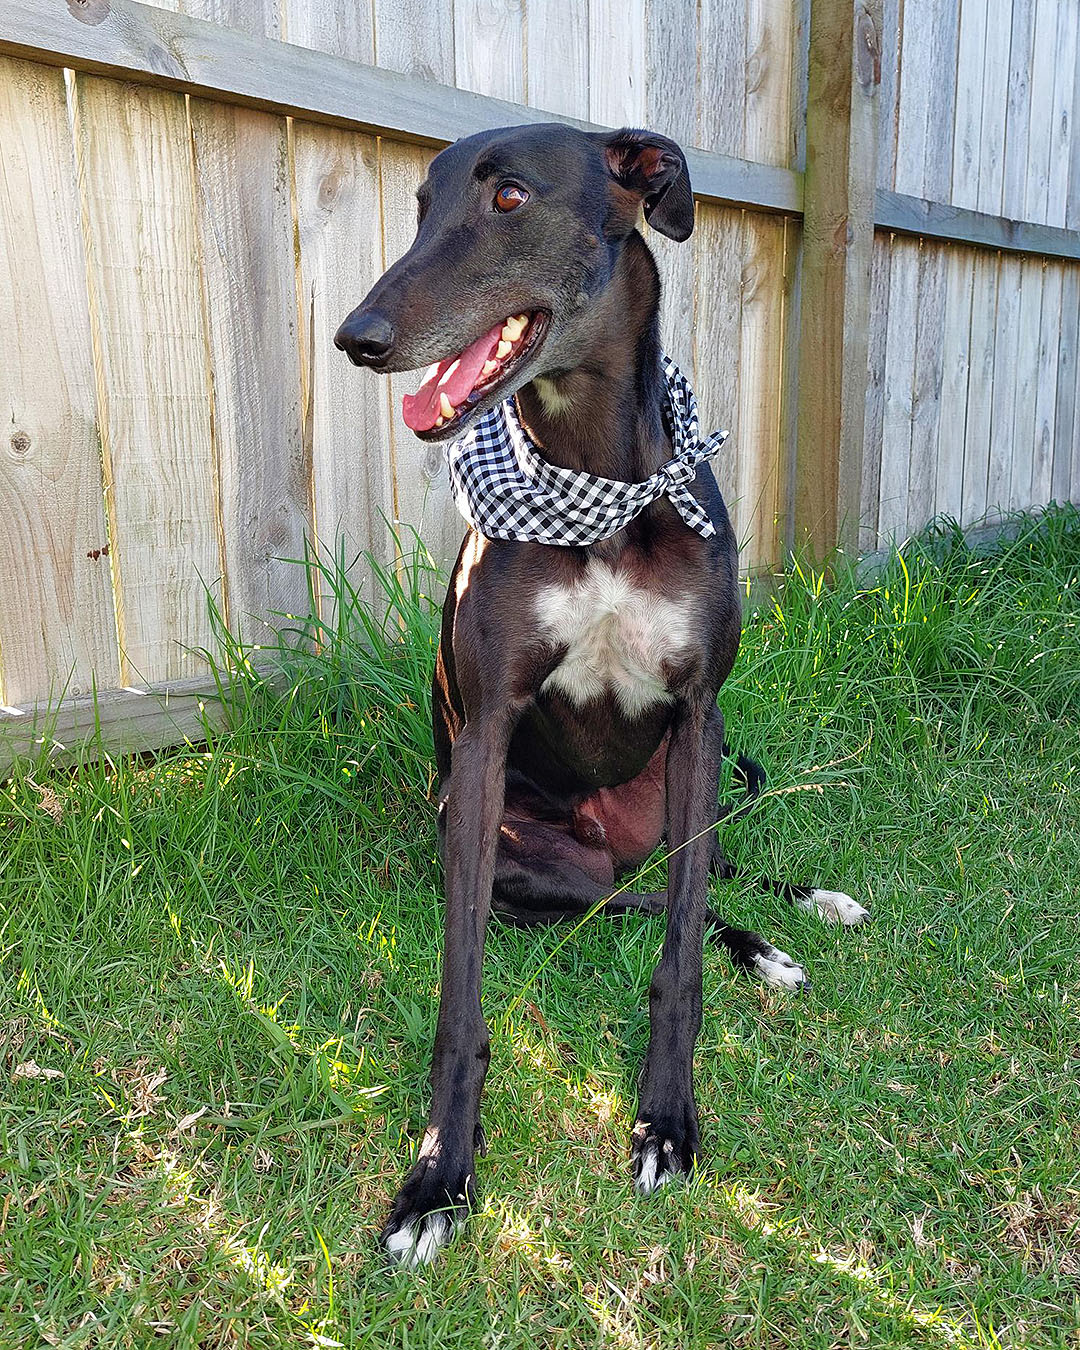 Remy the greyhound sits on the grass with a fetching scarf around his neck.